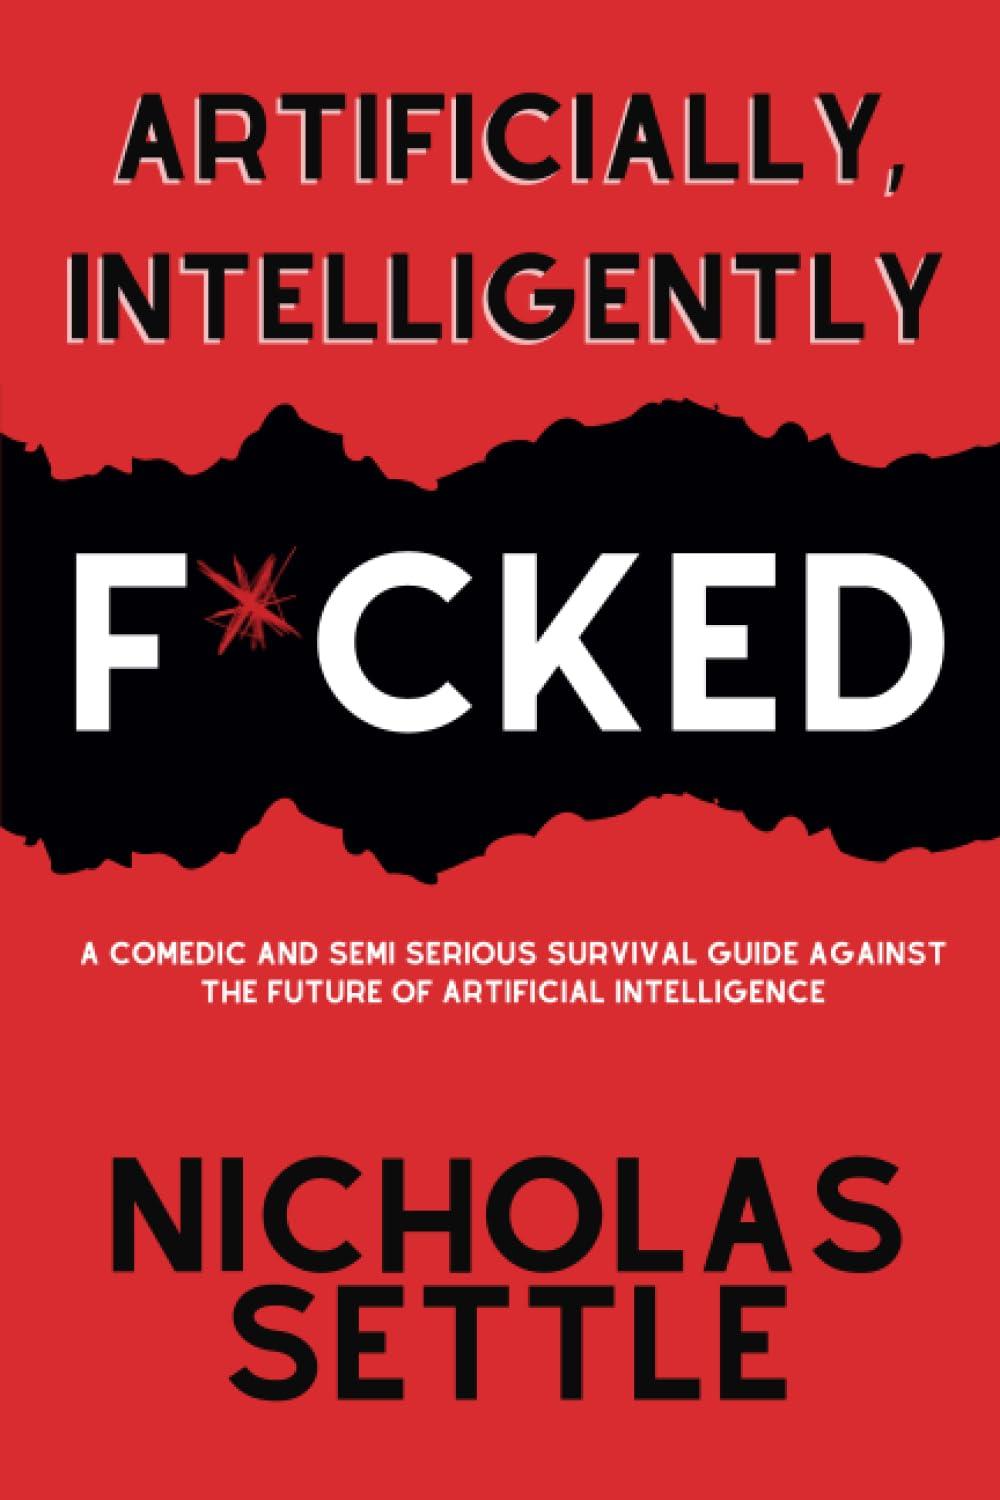 artificially intelligently f*cked a comedic and semi serious survival guide against the future of artificial